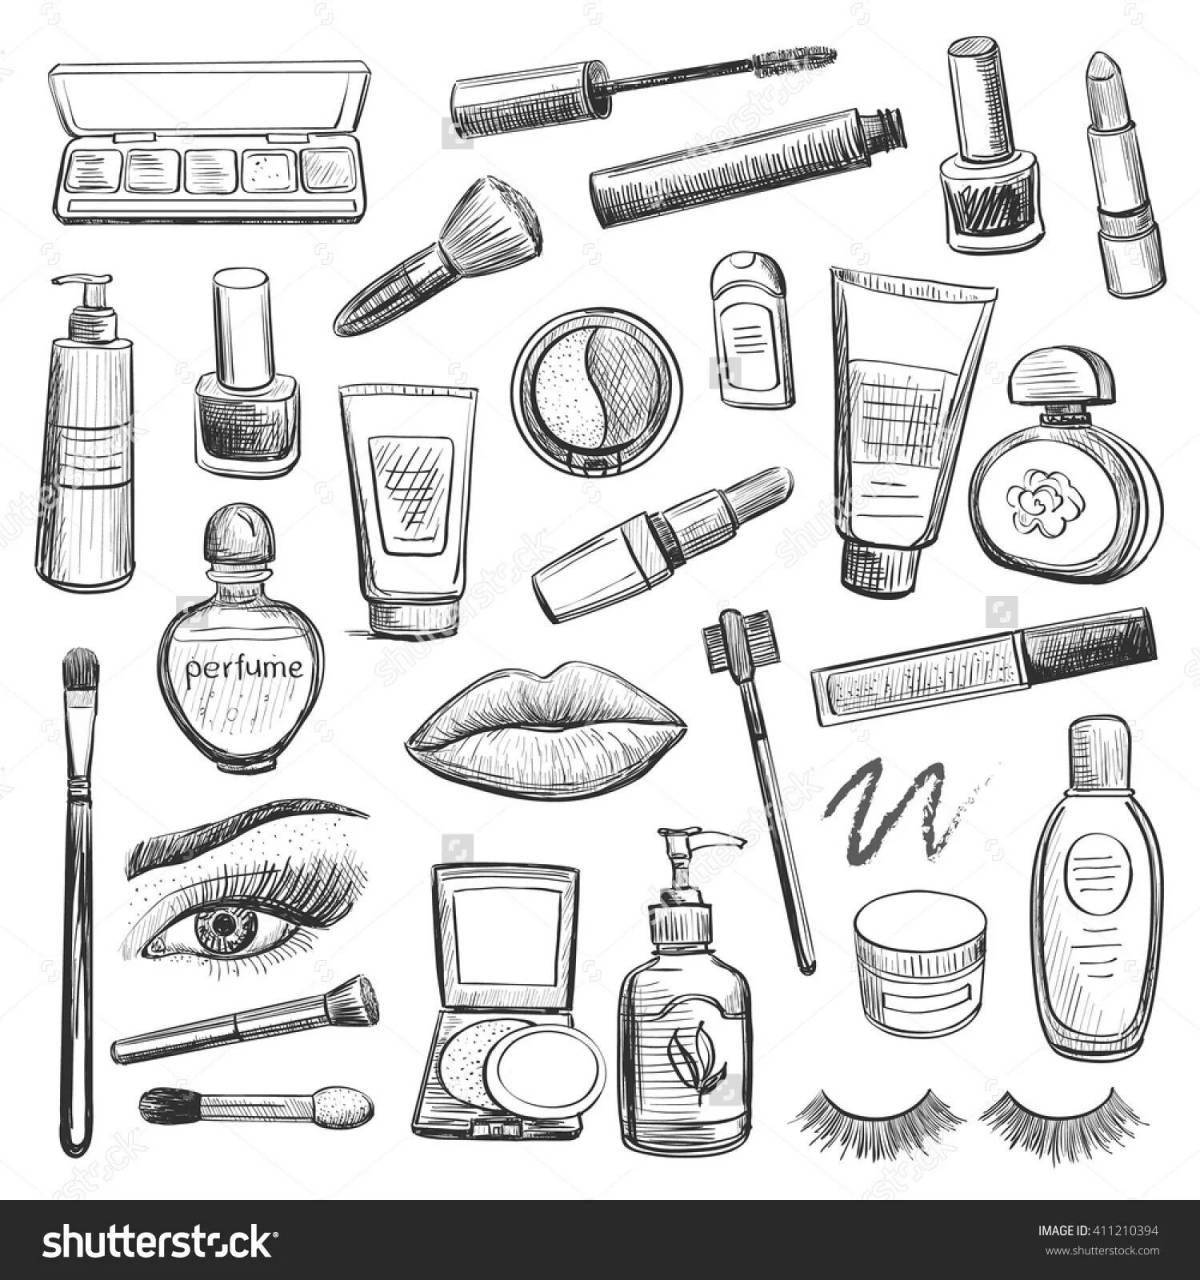 Coloring page of shining eyeshadow